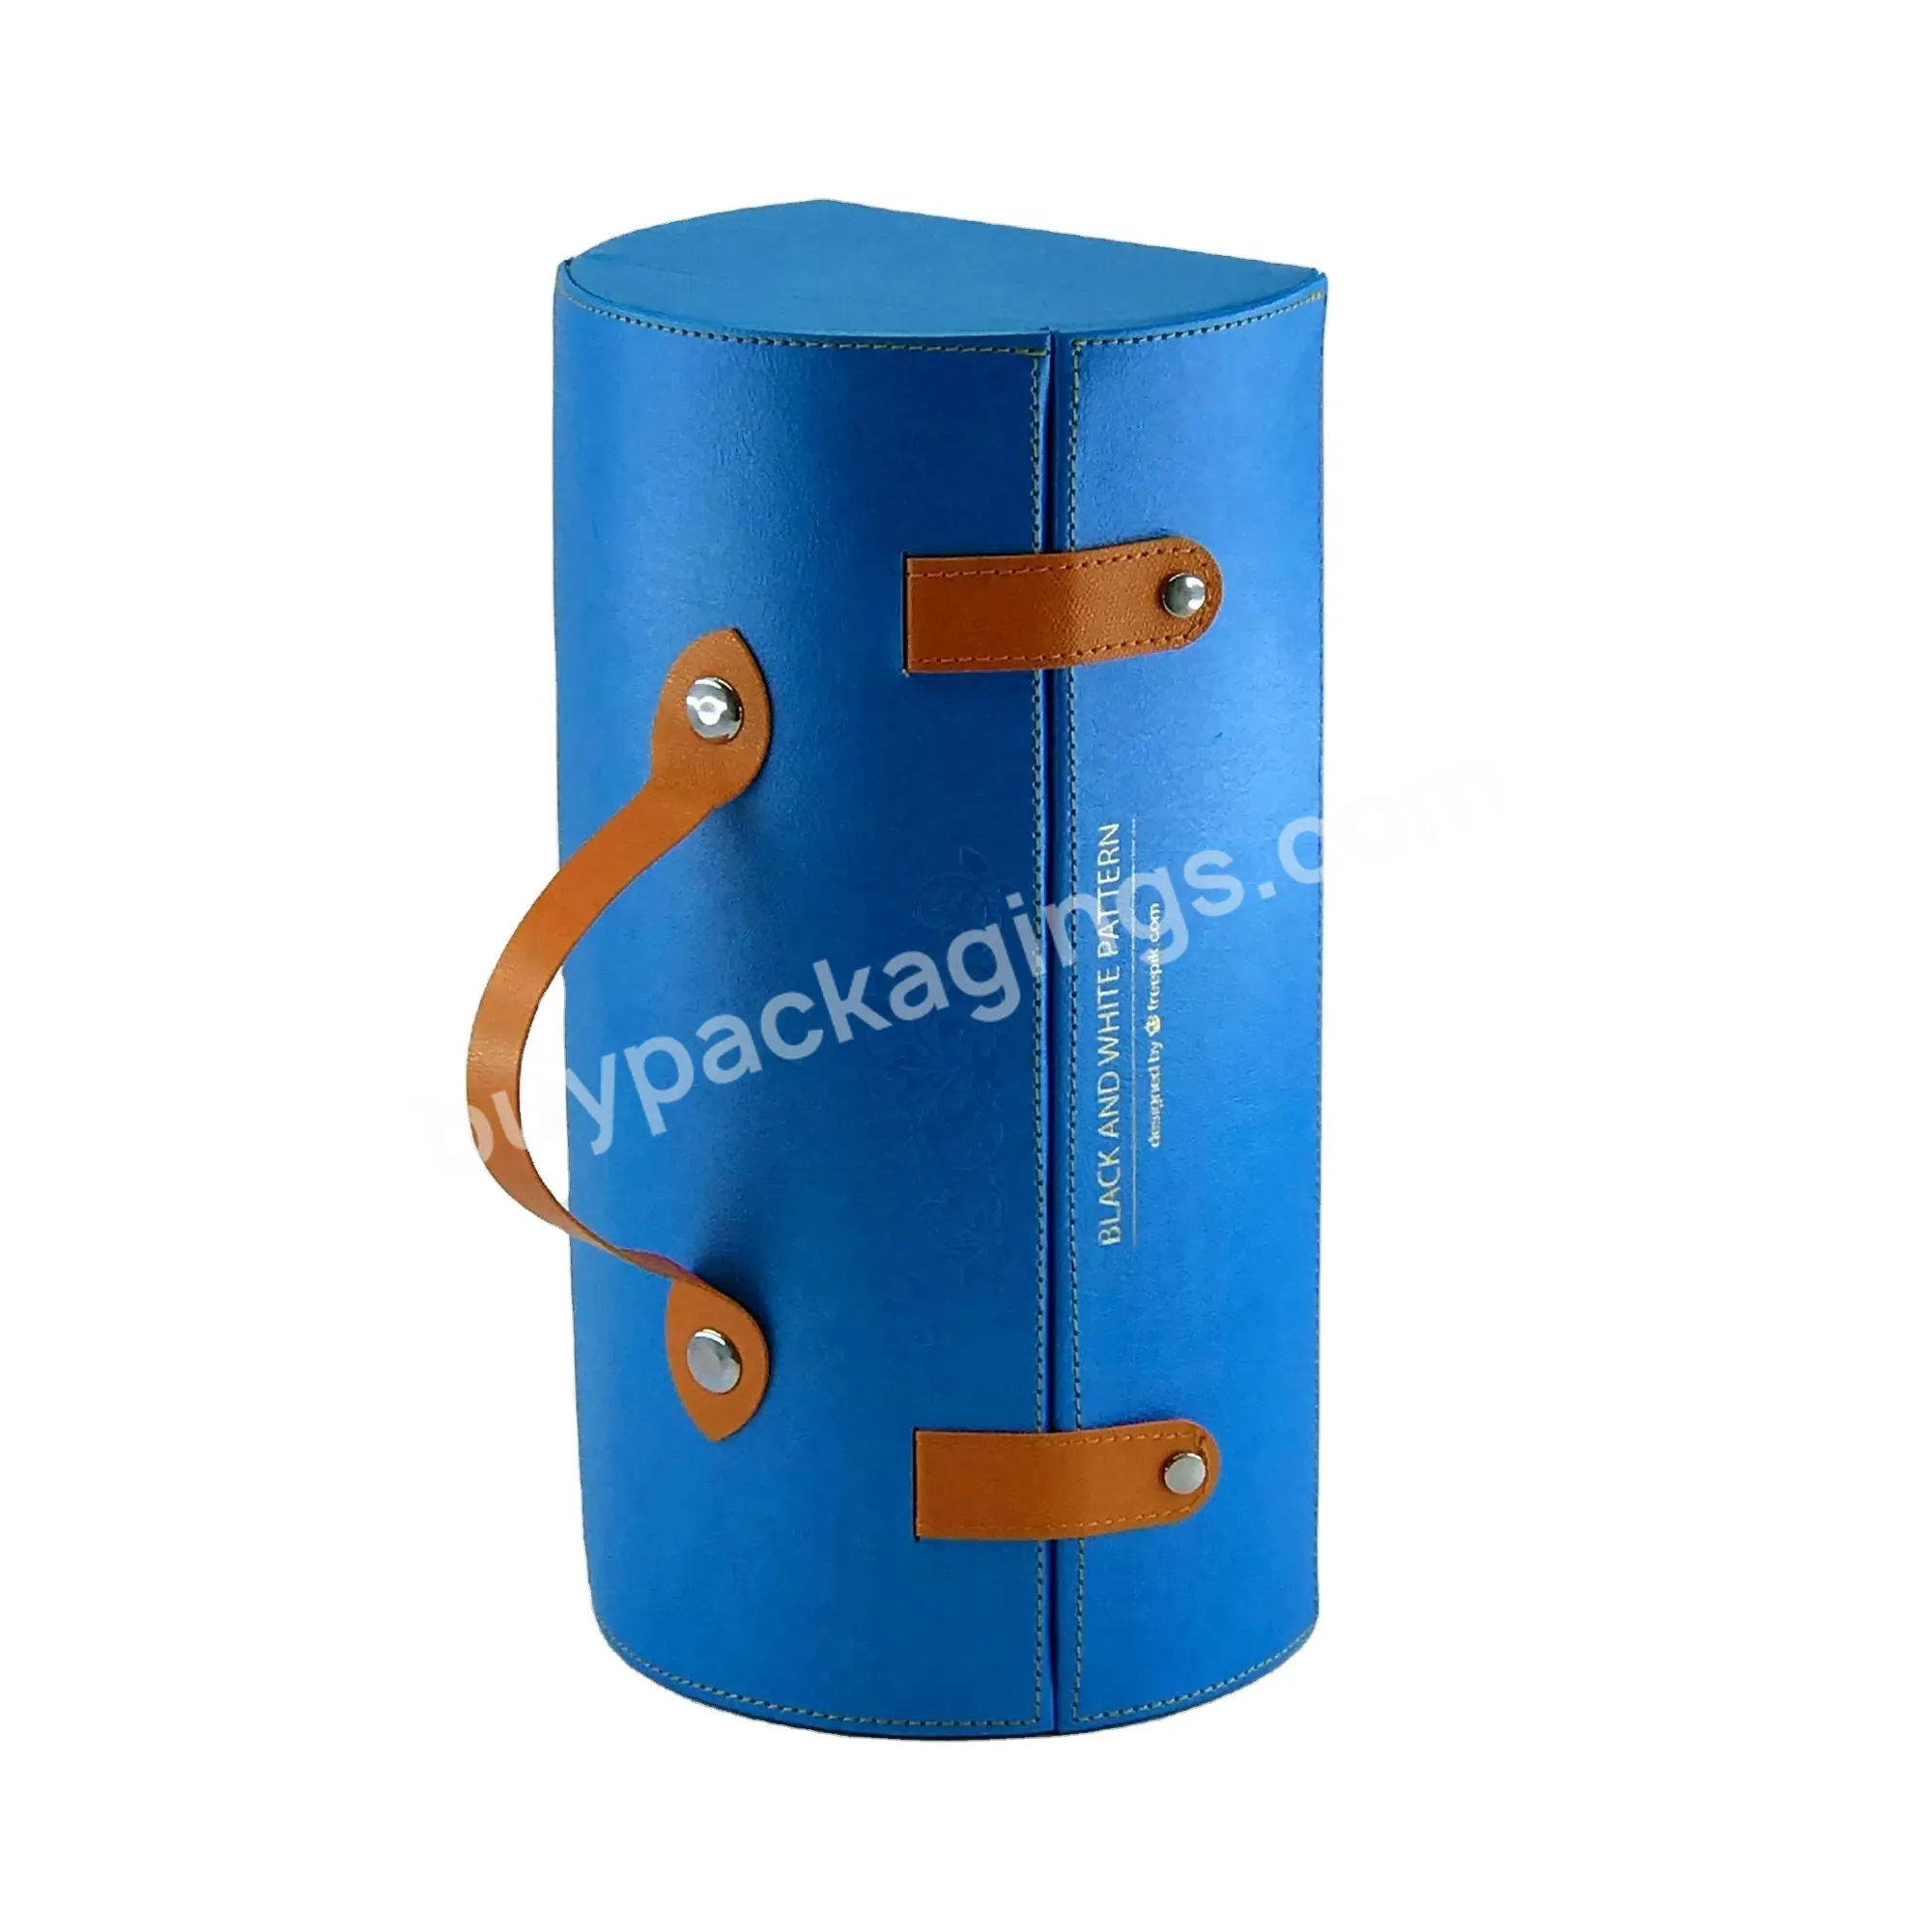 Custom Luxury Pu Leather Royal Orchid Display Cardboard With Buckles Belt Handle For Cosmetic Gift Set Packaging Box